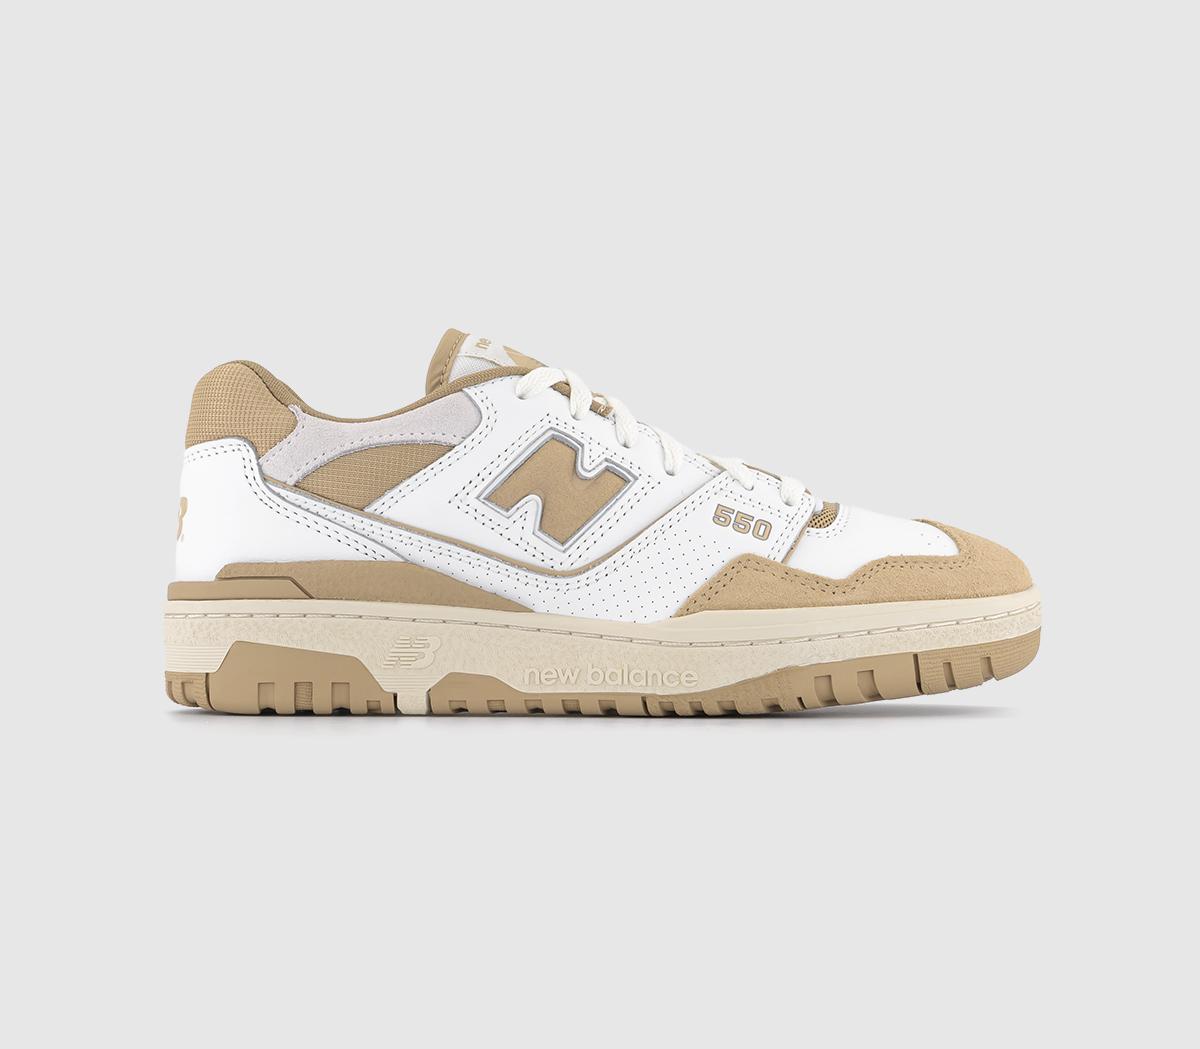 New Balance BB550 White Sand Offwhite Trainers – OFFCUTS SHOES by OFFICE